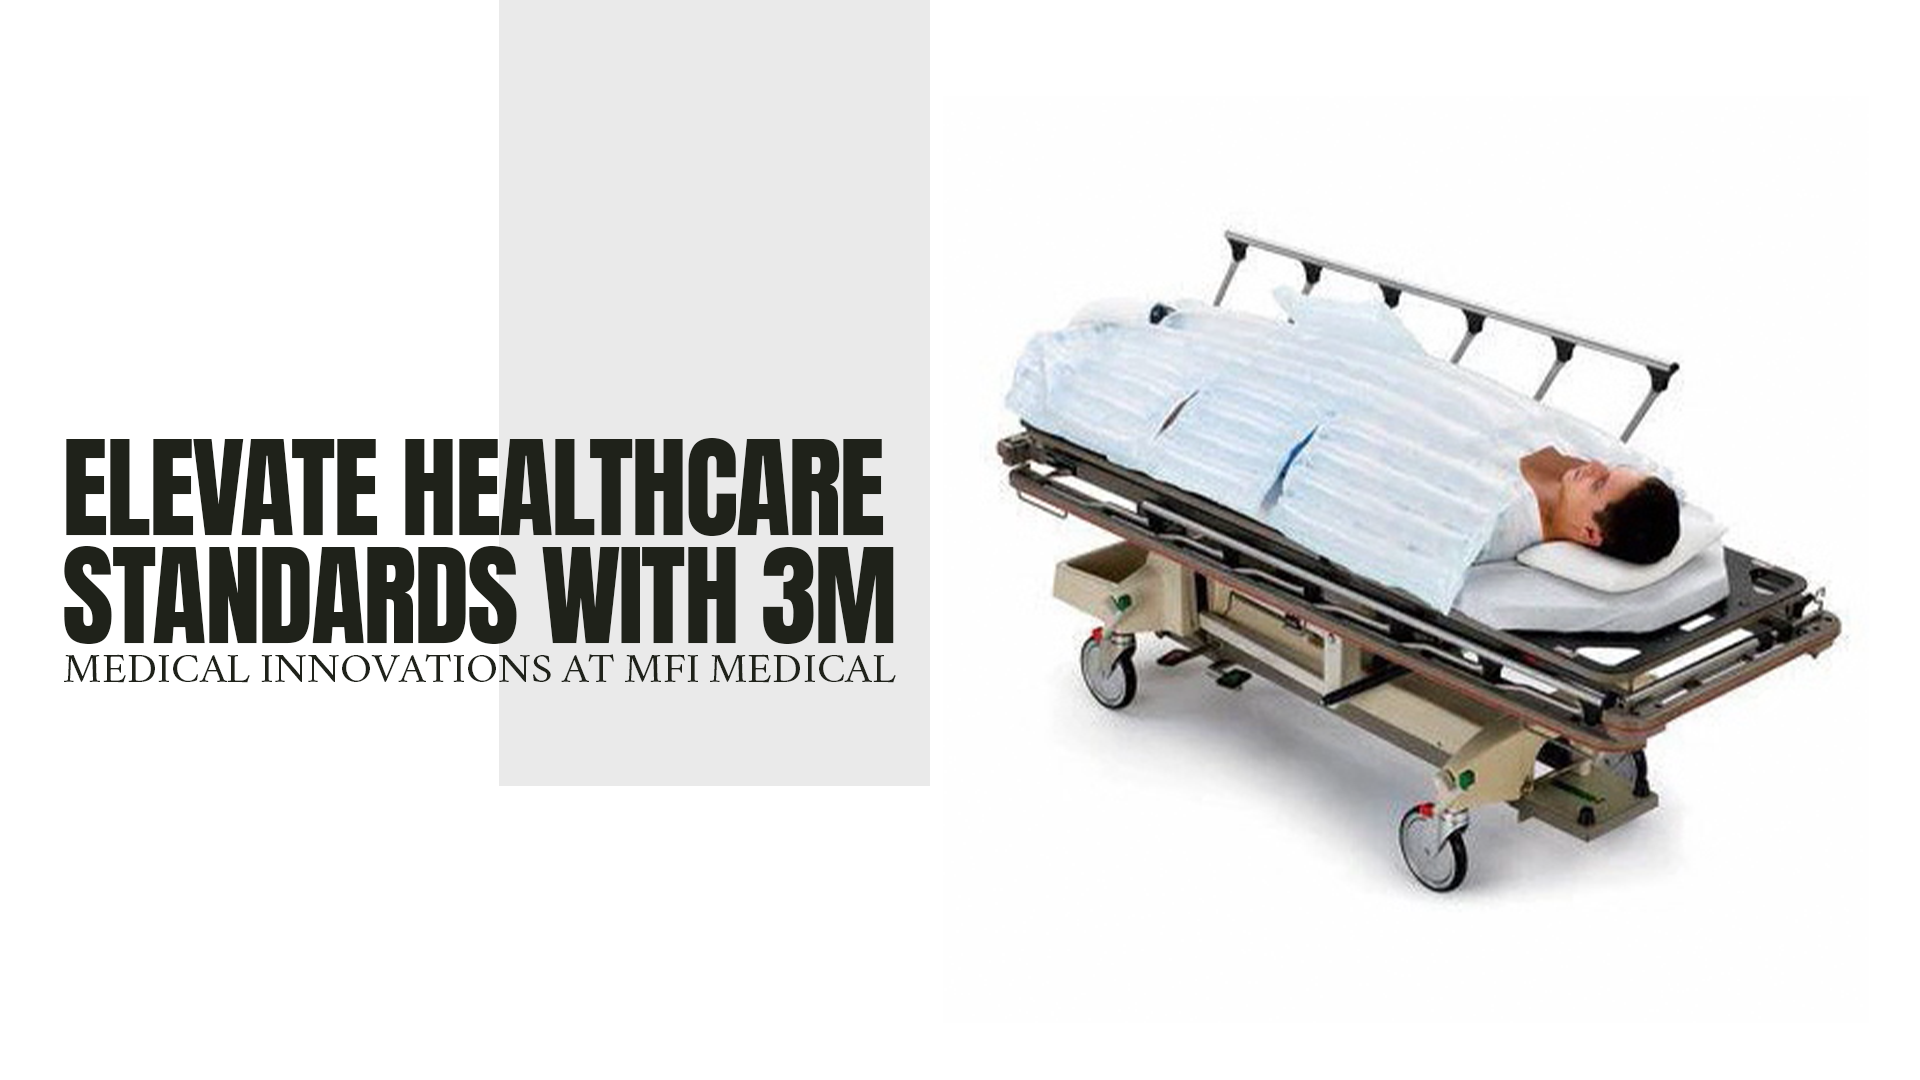 Elevate Healthcare Standards with 3M Medical Innovations at MFI Medical